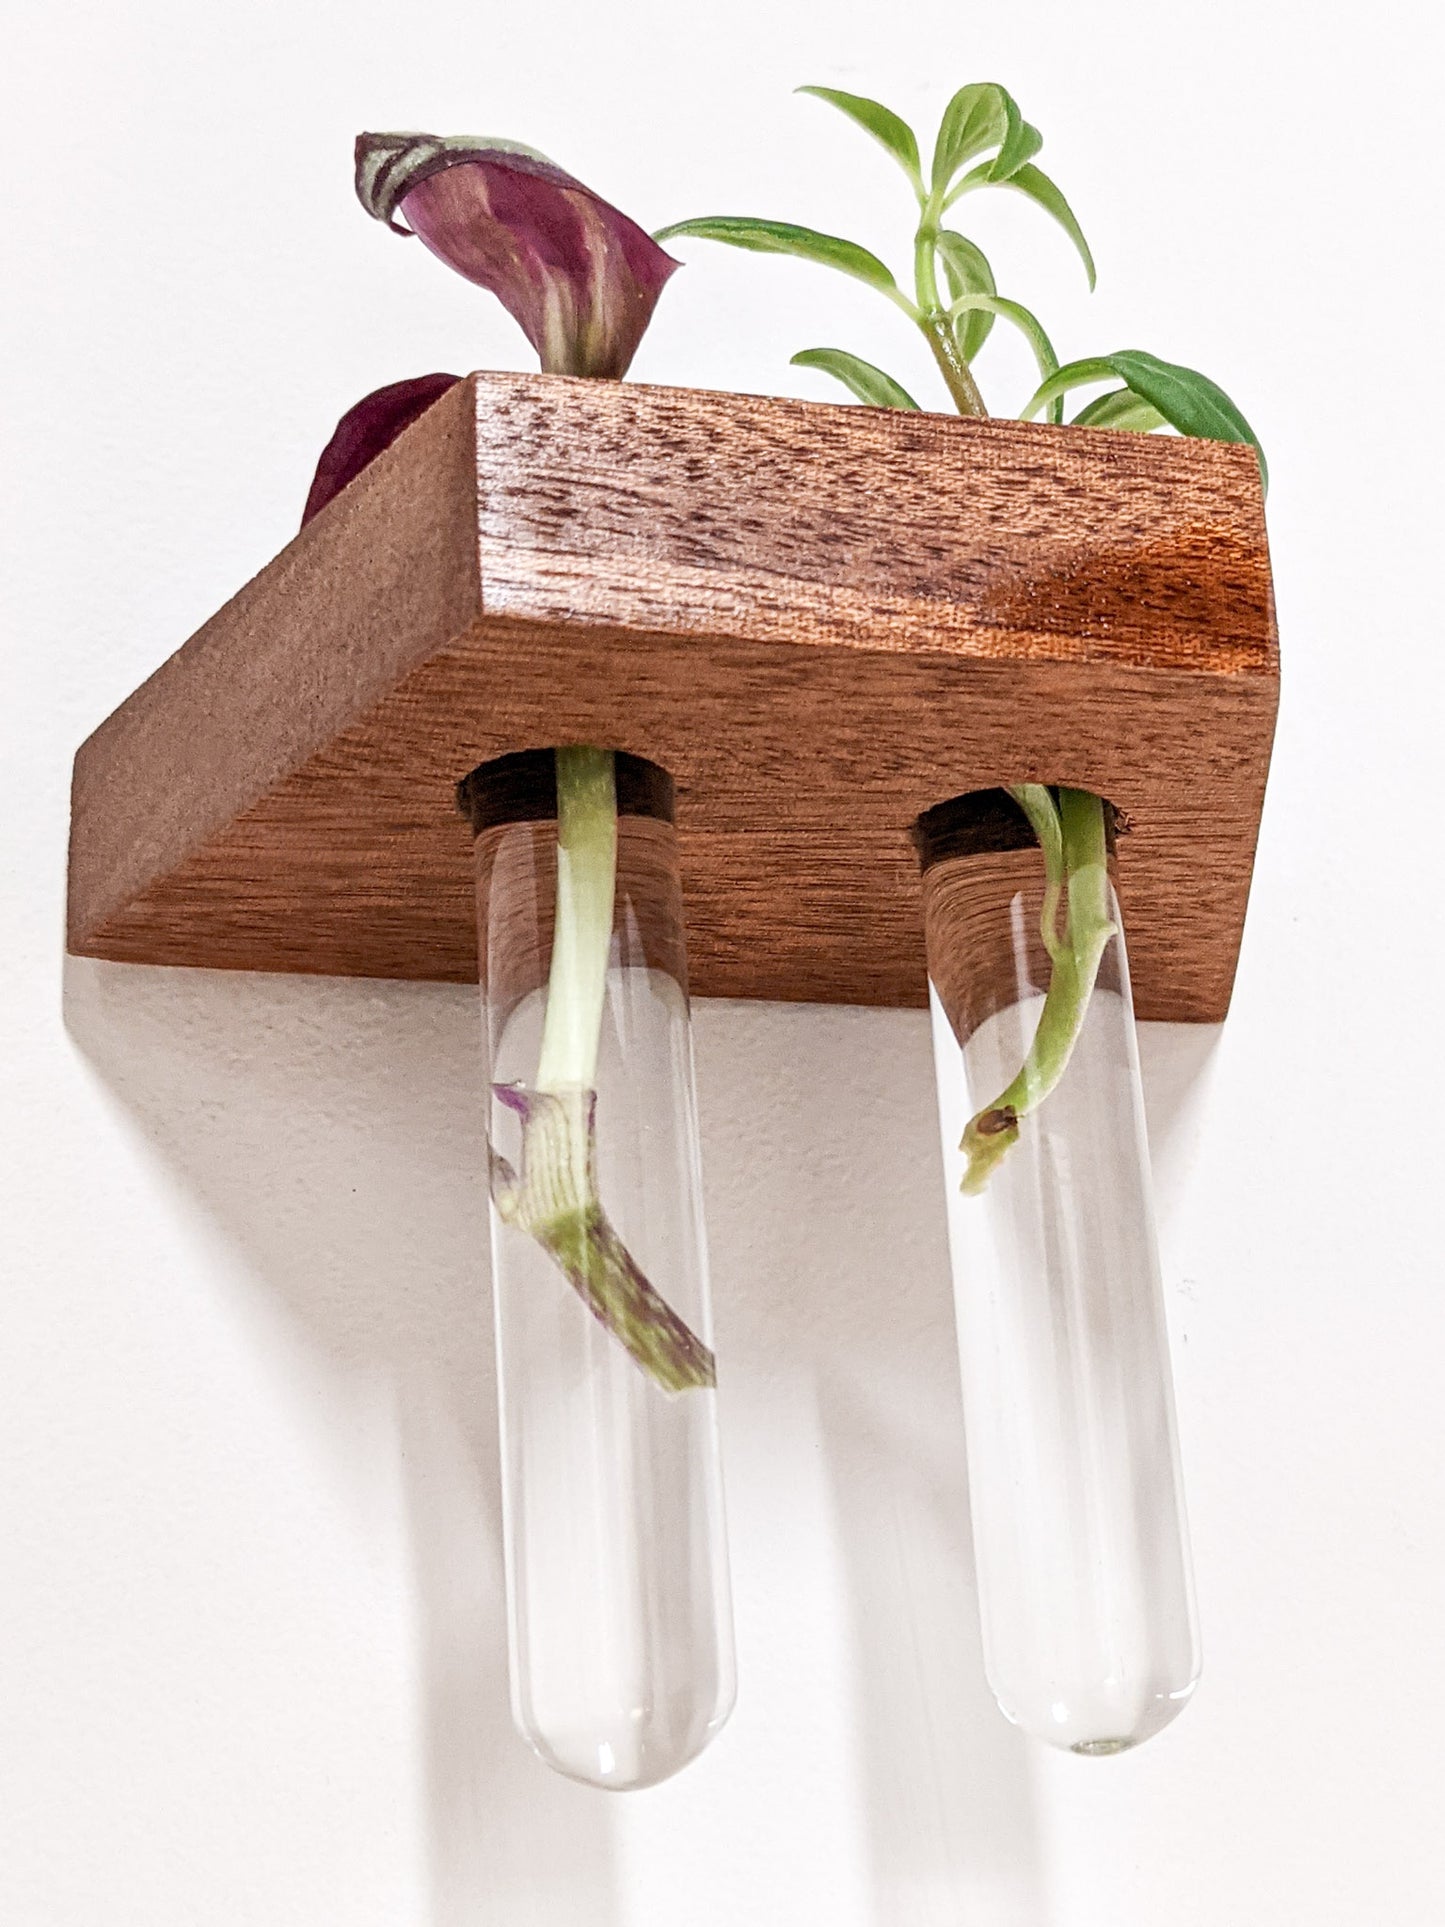 A small mahogany propagation shelf is wall-mounted. Two test tubes securely fits within the provided hole and a vibrant wandering jew cutting sits within the test tubes. One is purple and the other is green.